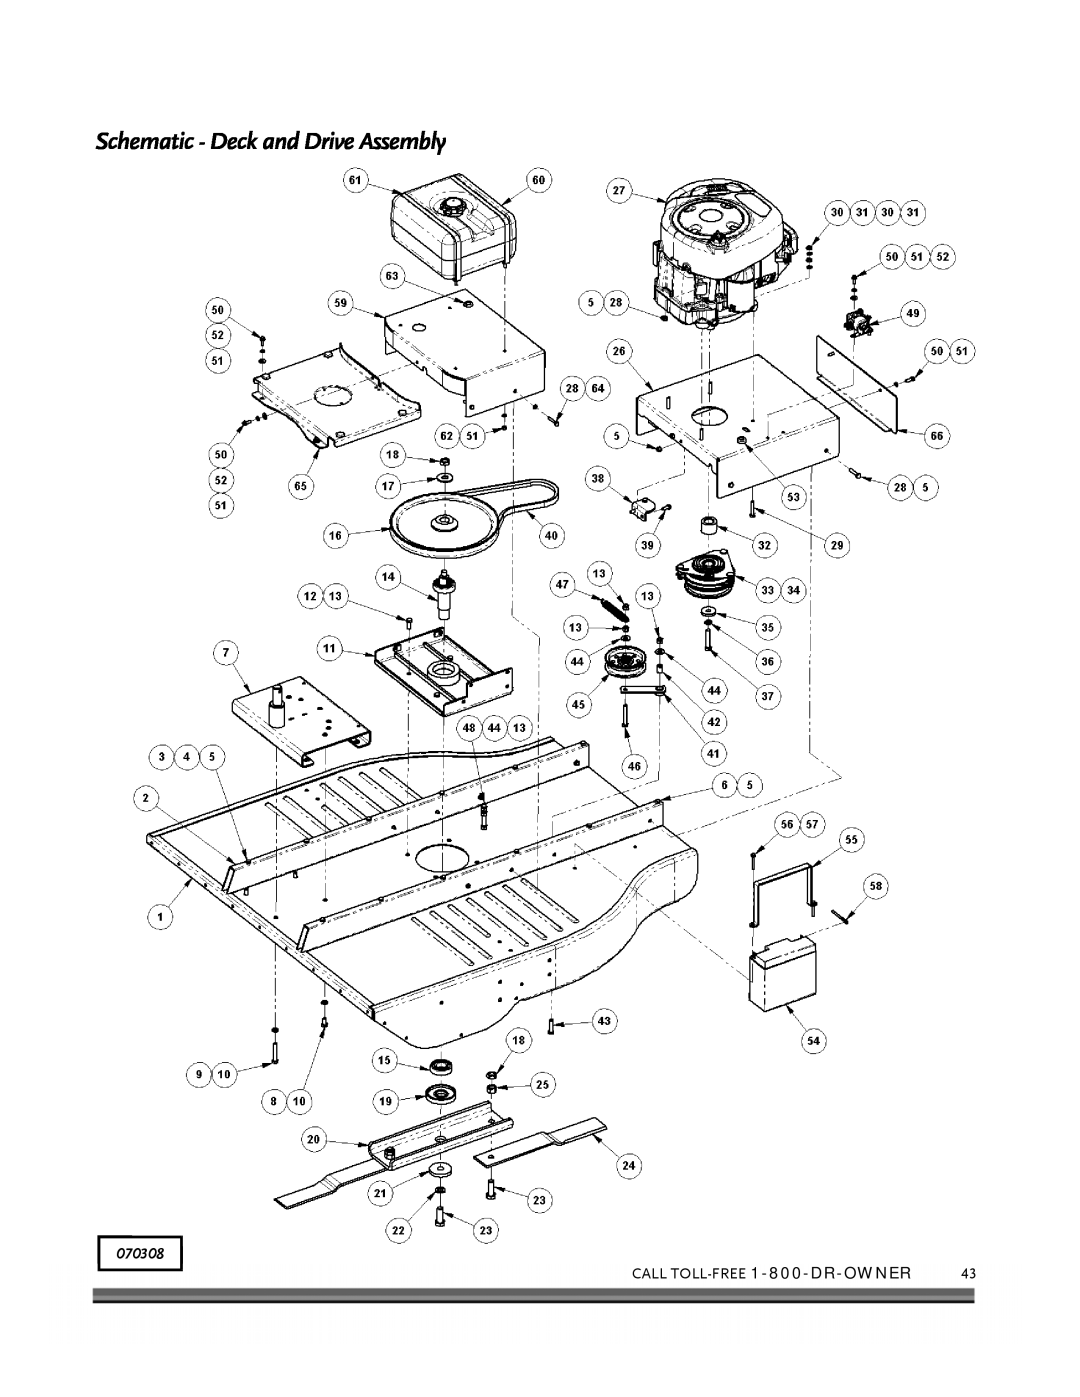 Briggs & Stratton FIELD and BRUSH MOWER manual Schematic - Deck and Drive Assembly, CALL TOLL-FREE 1-800-DR-OWNER, 070308 